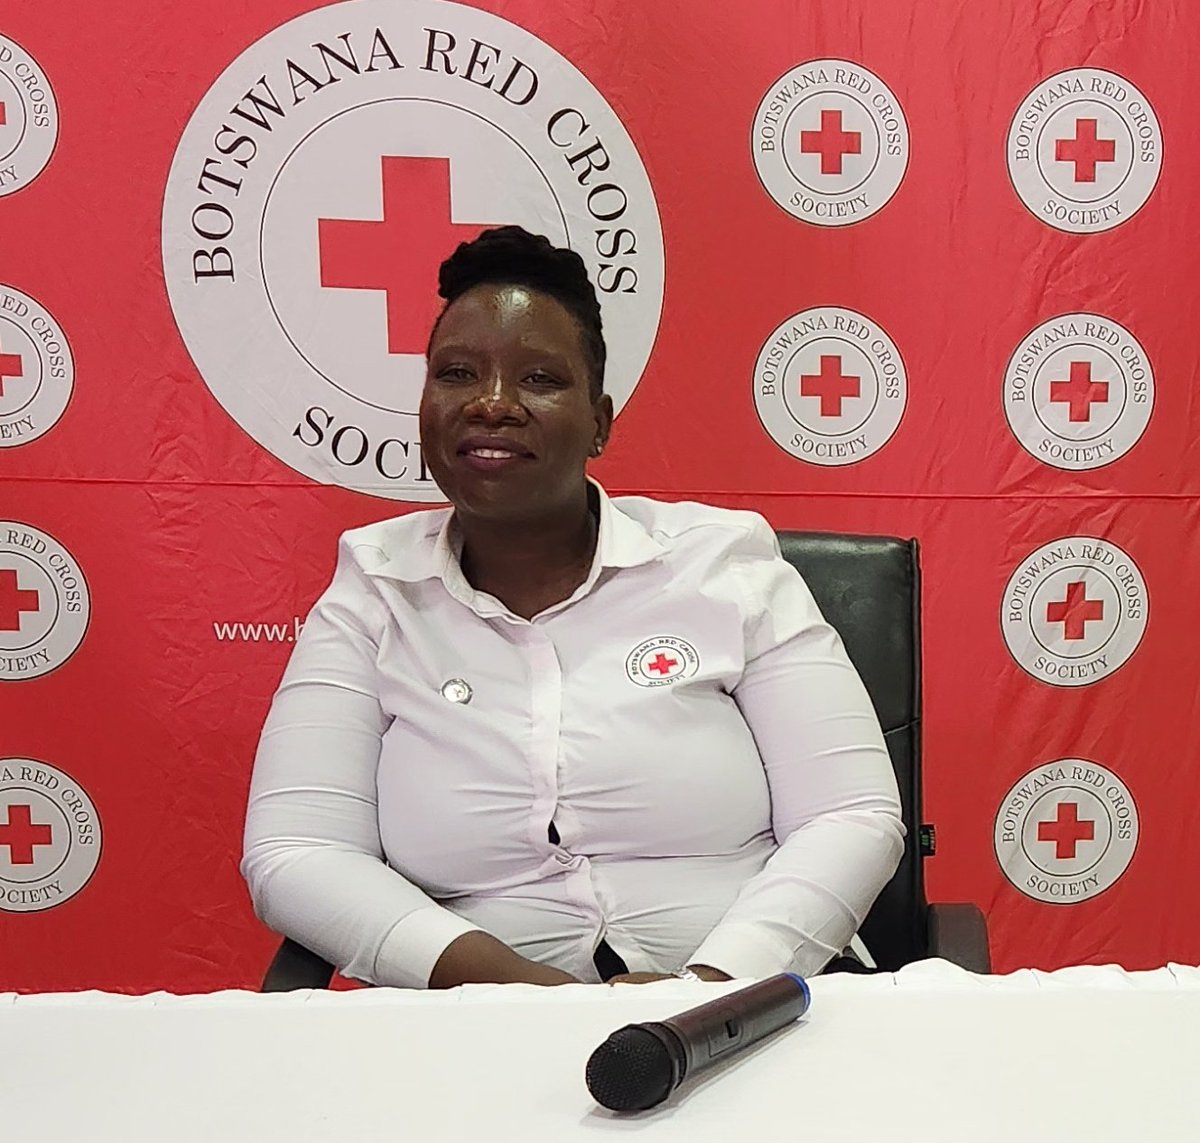 The Botswana Red Cross Society's 2023 Annual General Assembly and Elections in Kang were a success! Mr. Odirile Otto Itumeleng is our President, and Ms. Otshidile Patience Tshegetsang is the Vice President. Get ready for an amazing year ahead!